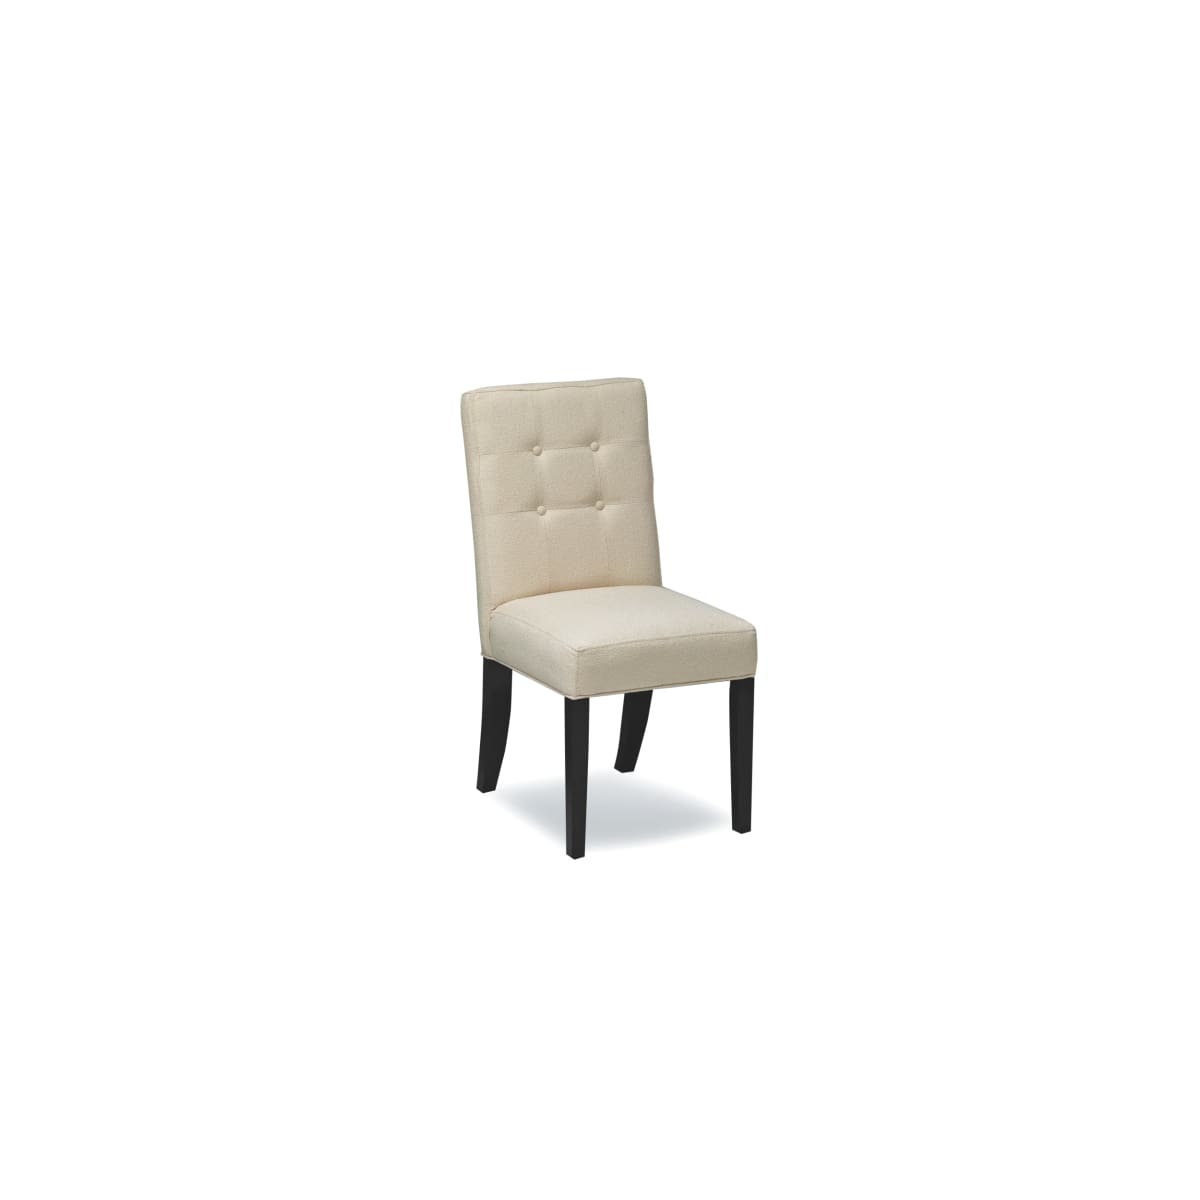 Duke Dining Chair - 38x24x19 - dining chairs